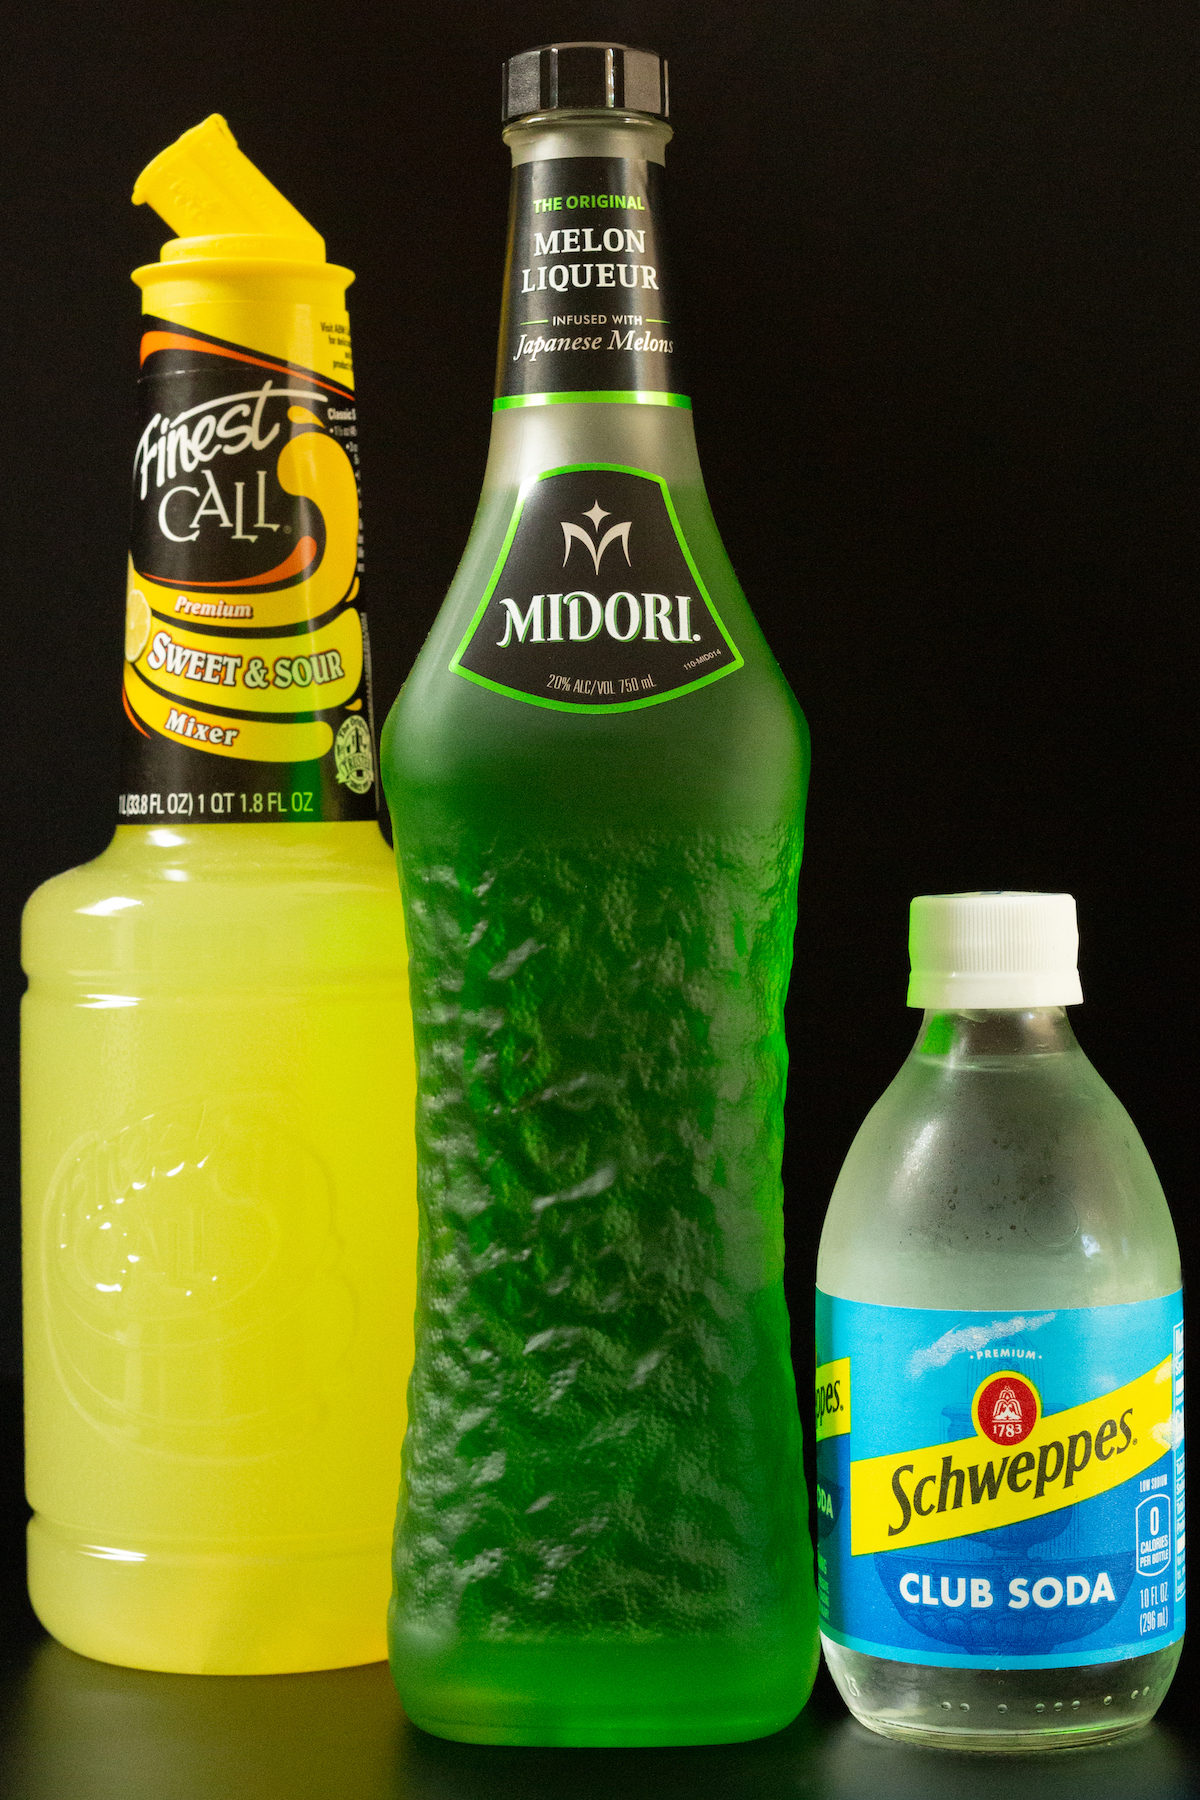 A bottle of sweet 7 sour mix, Midori, and club soda all on a black background.